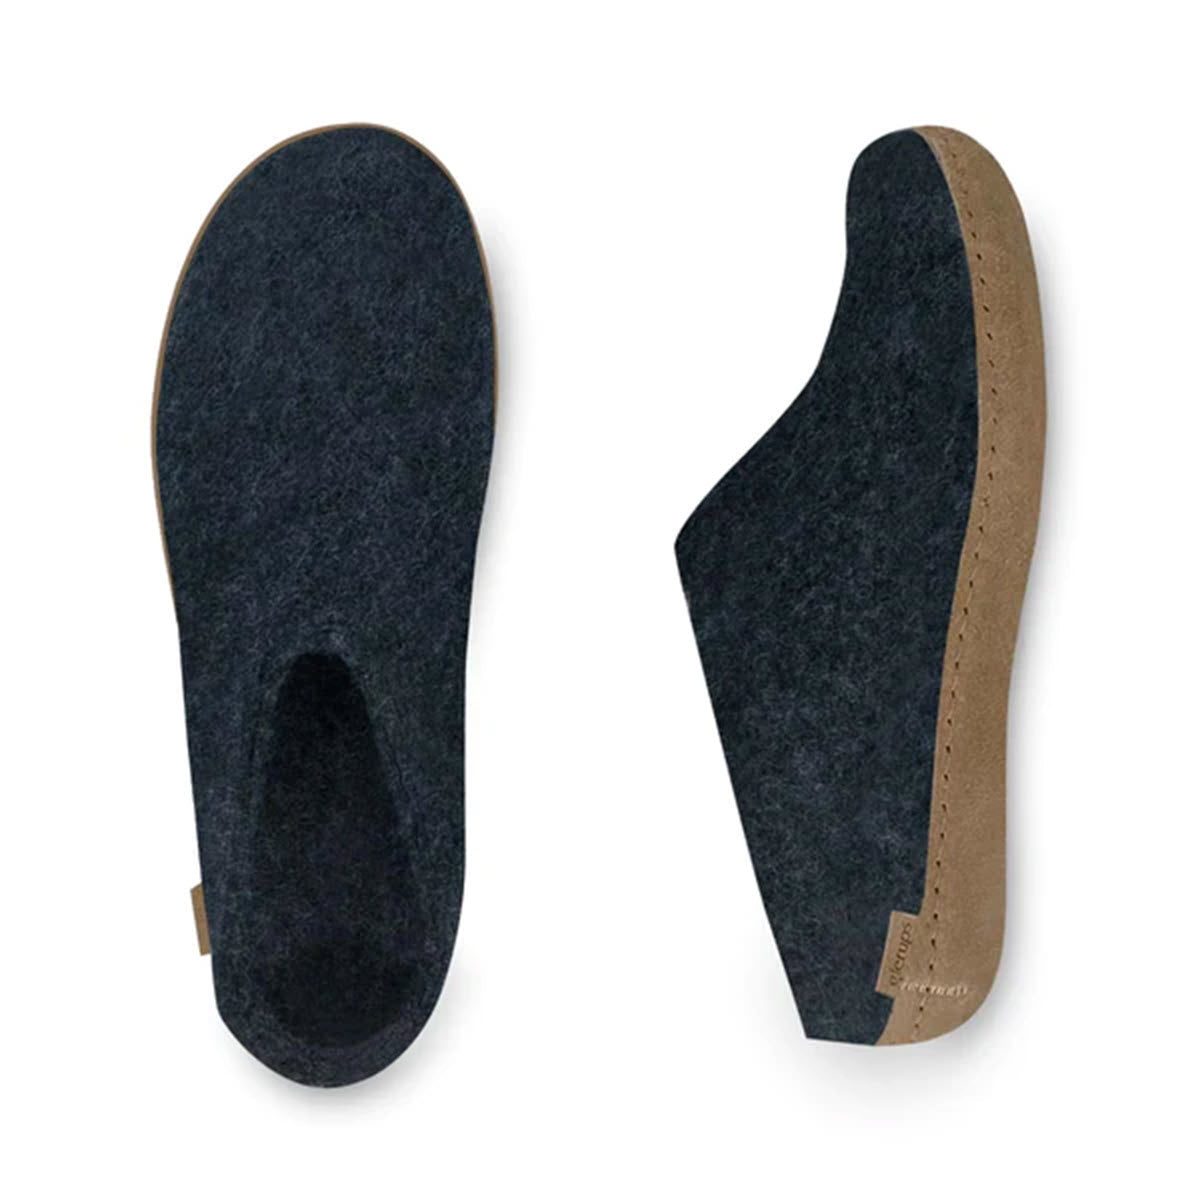 Two GLERUPS THE SLIP ON LEATHER DENIM - ADULTS insoles with dark gray felt tops and cork bottoms, viewed from above on a white background, designed to keep your feet warm and dry.